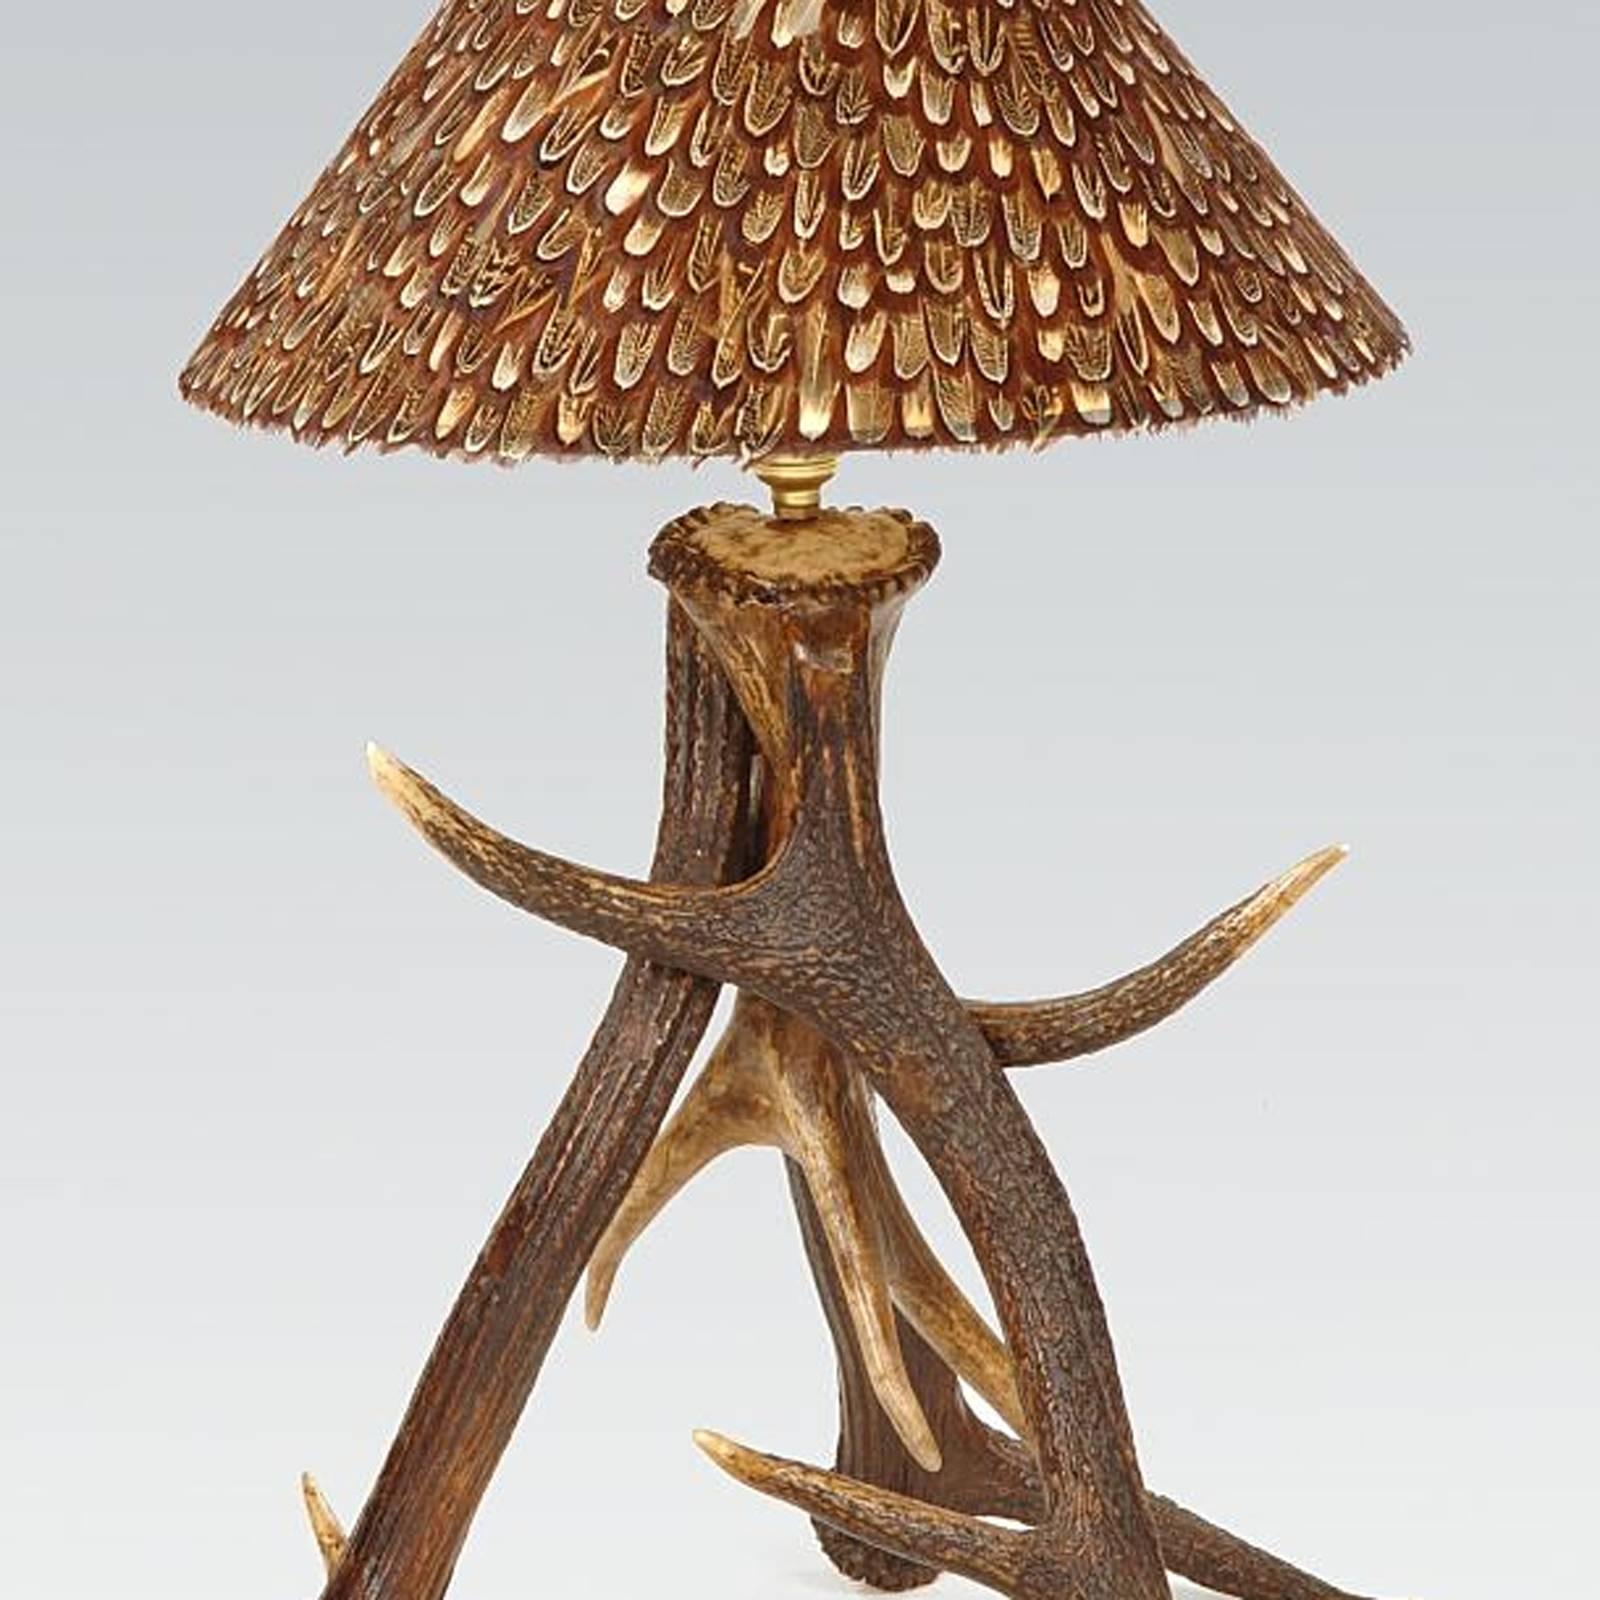 Three Antlers Table Lamp with Partridge Feather Lamp Shade In Excellent Condition For Sale In Paris, FR